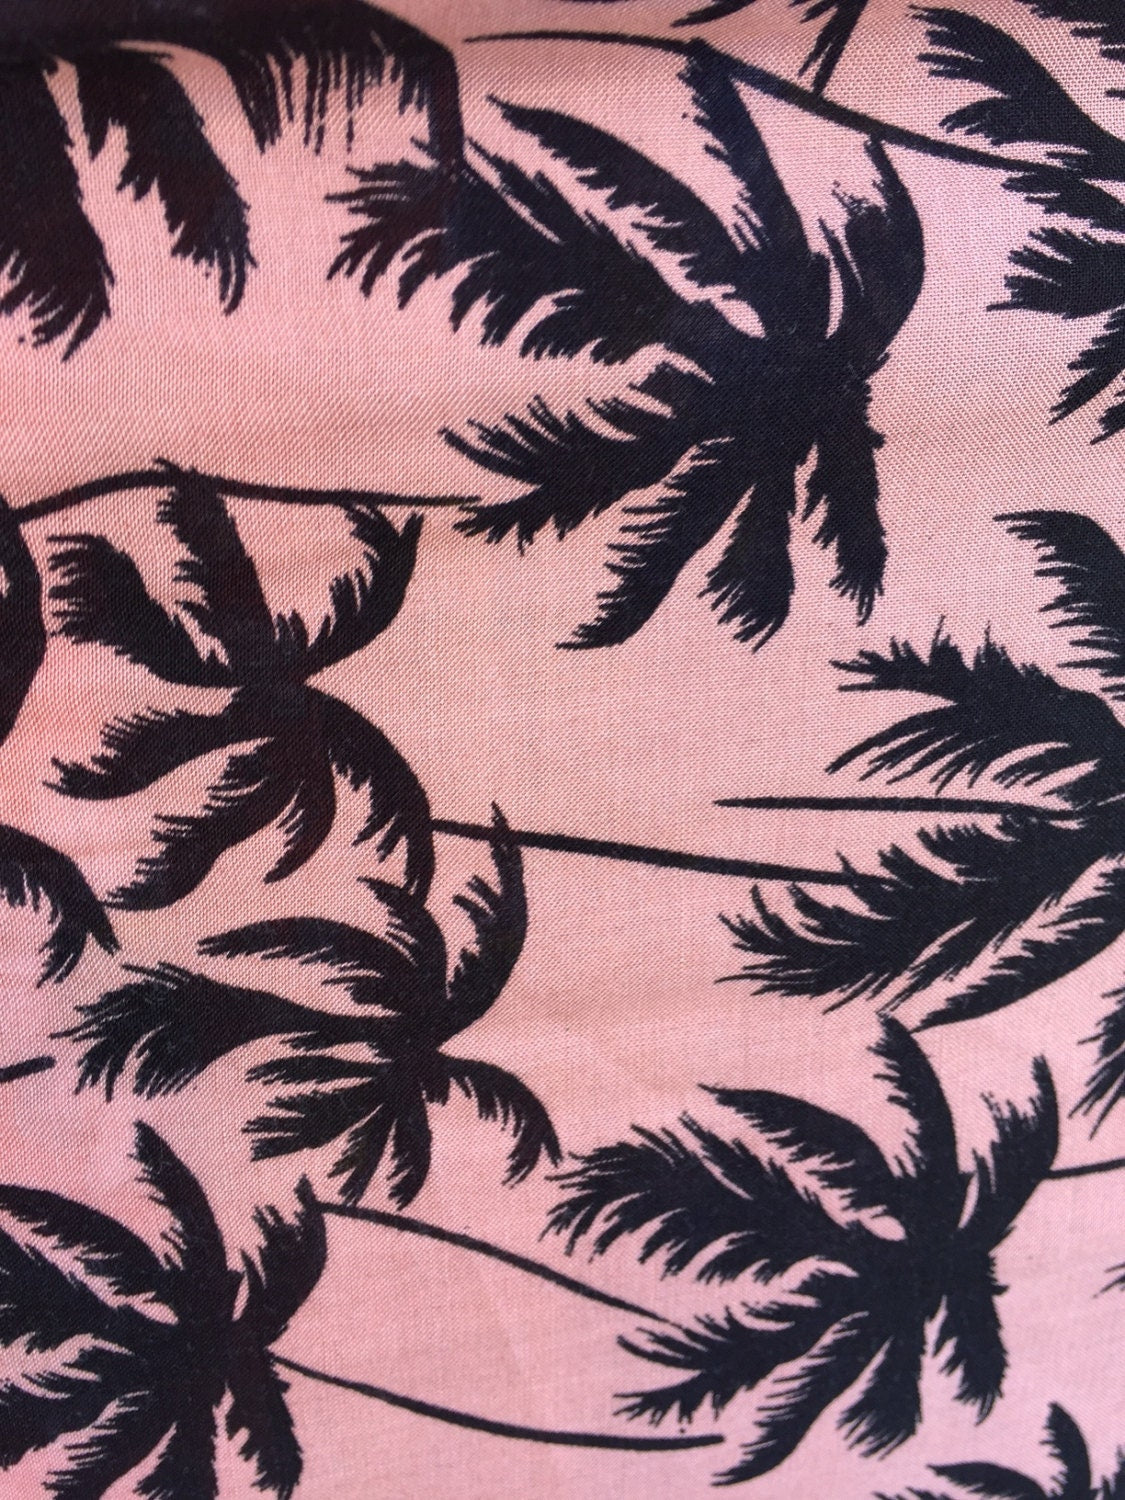 100% rayon challis Palm trees on Tuscan pink background soft tropical flowy fabric sold by the yard dress